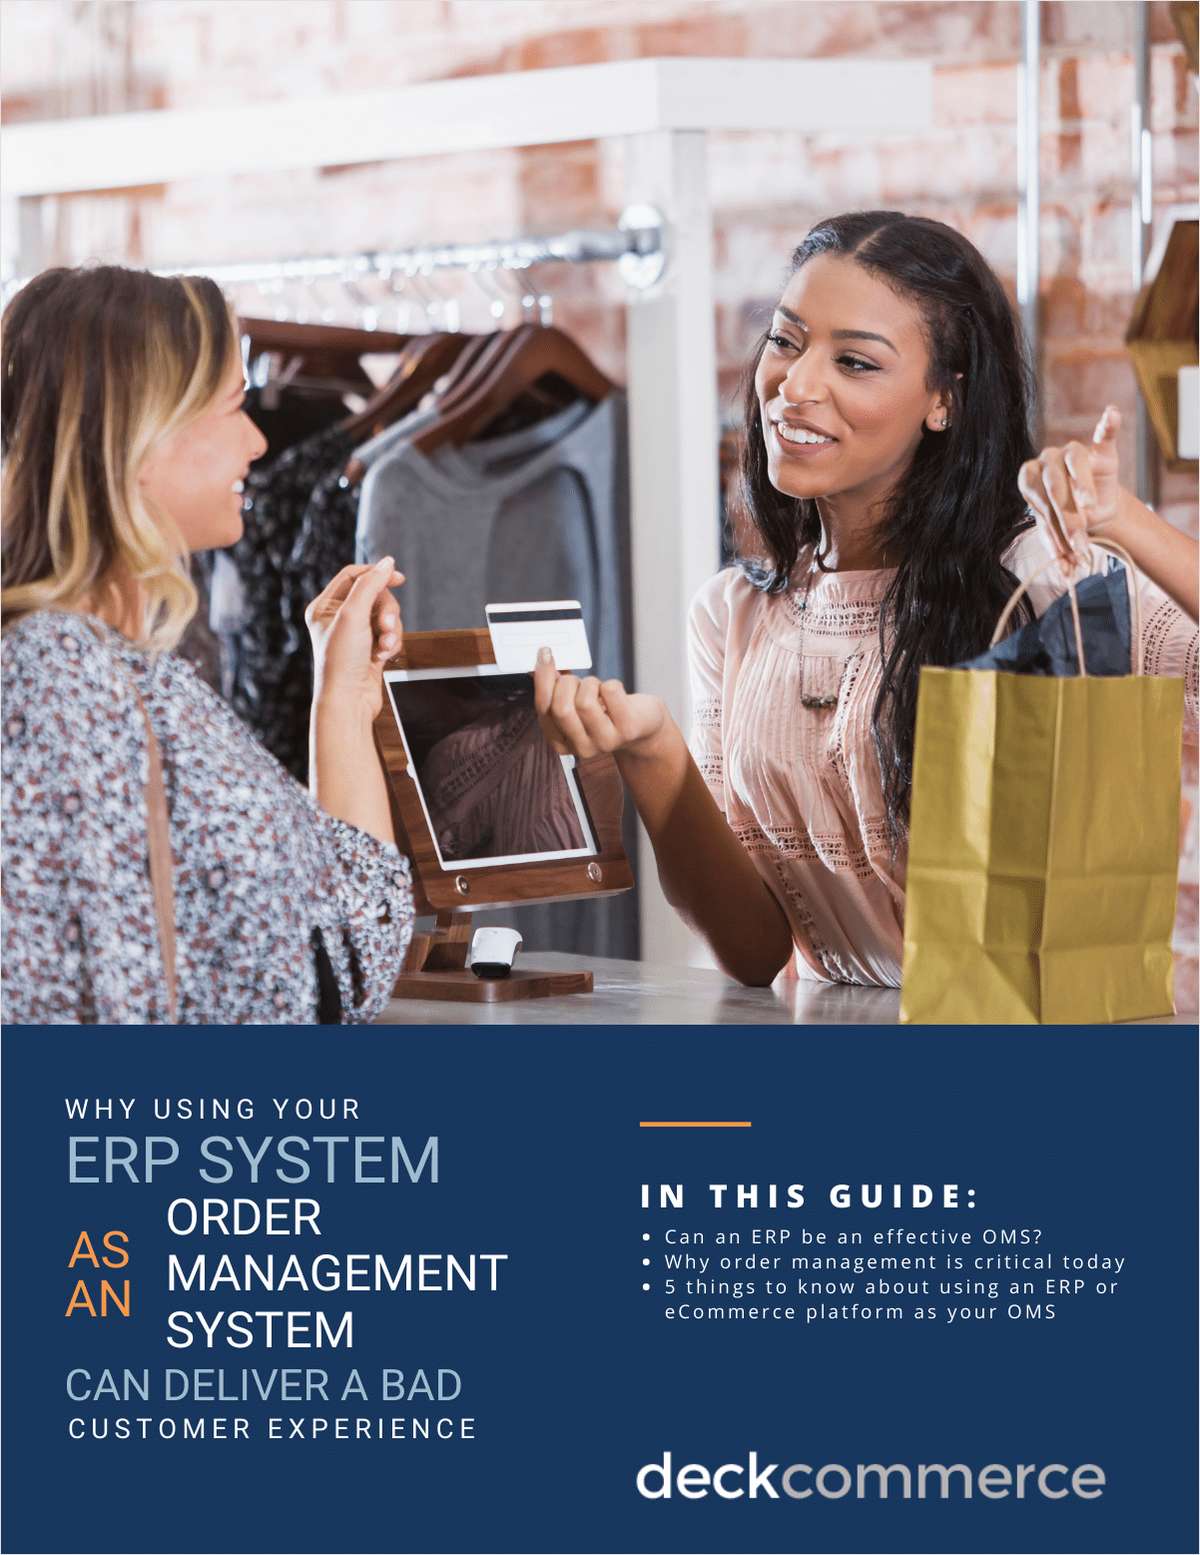 If you're using your ERP or eCommerce platform as your OMS, it may be costing you added expense and lost revenue in the long-run